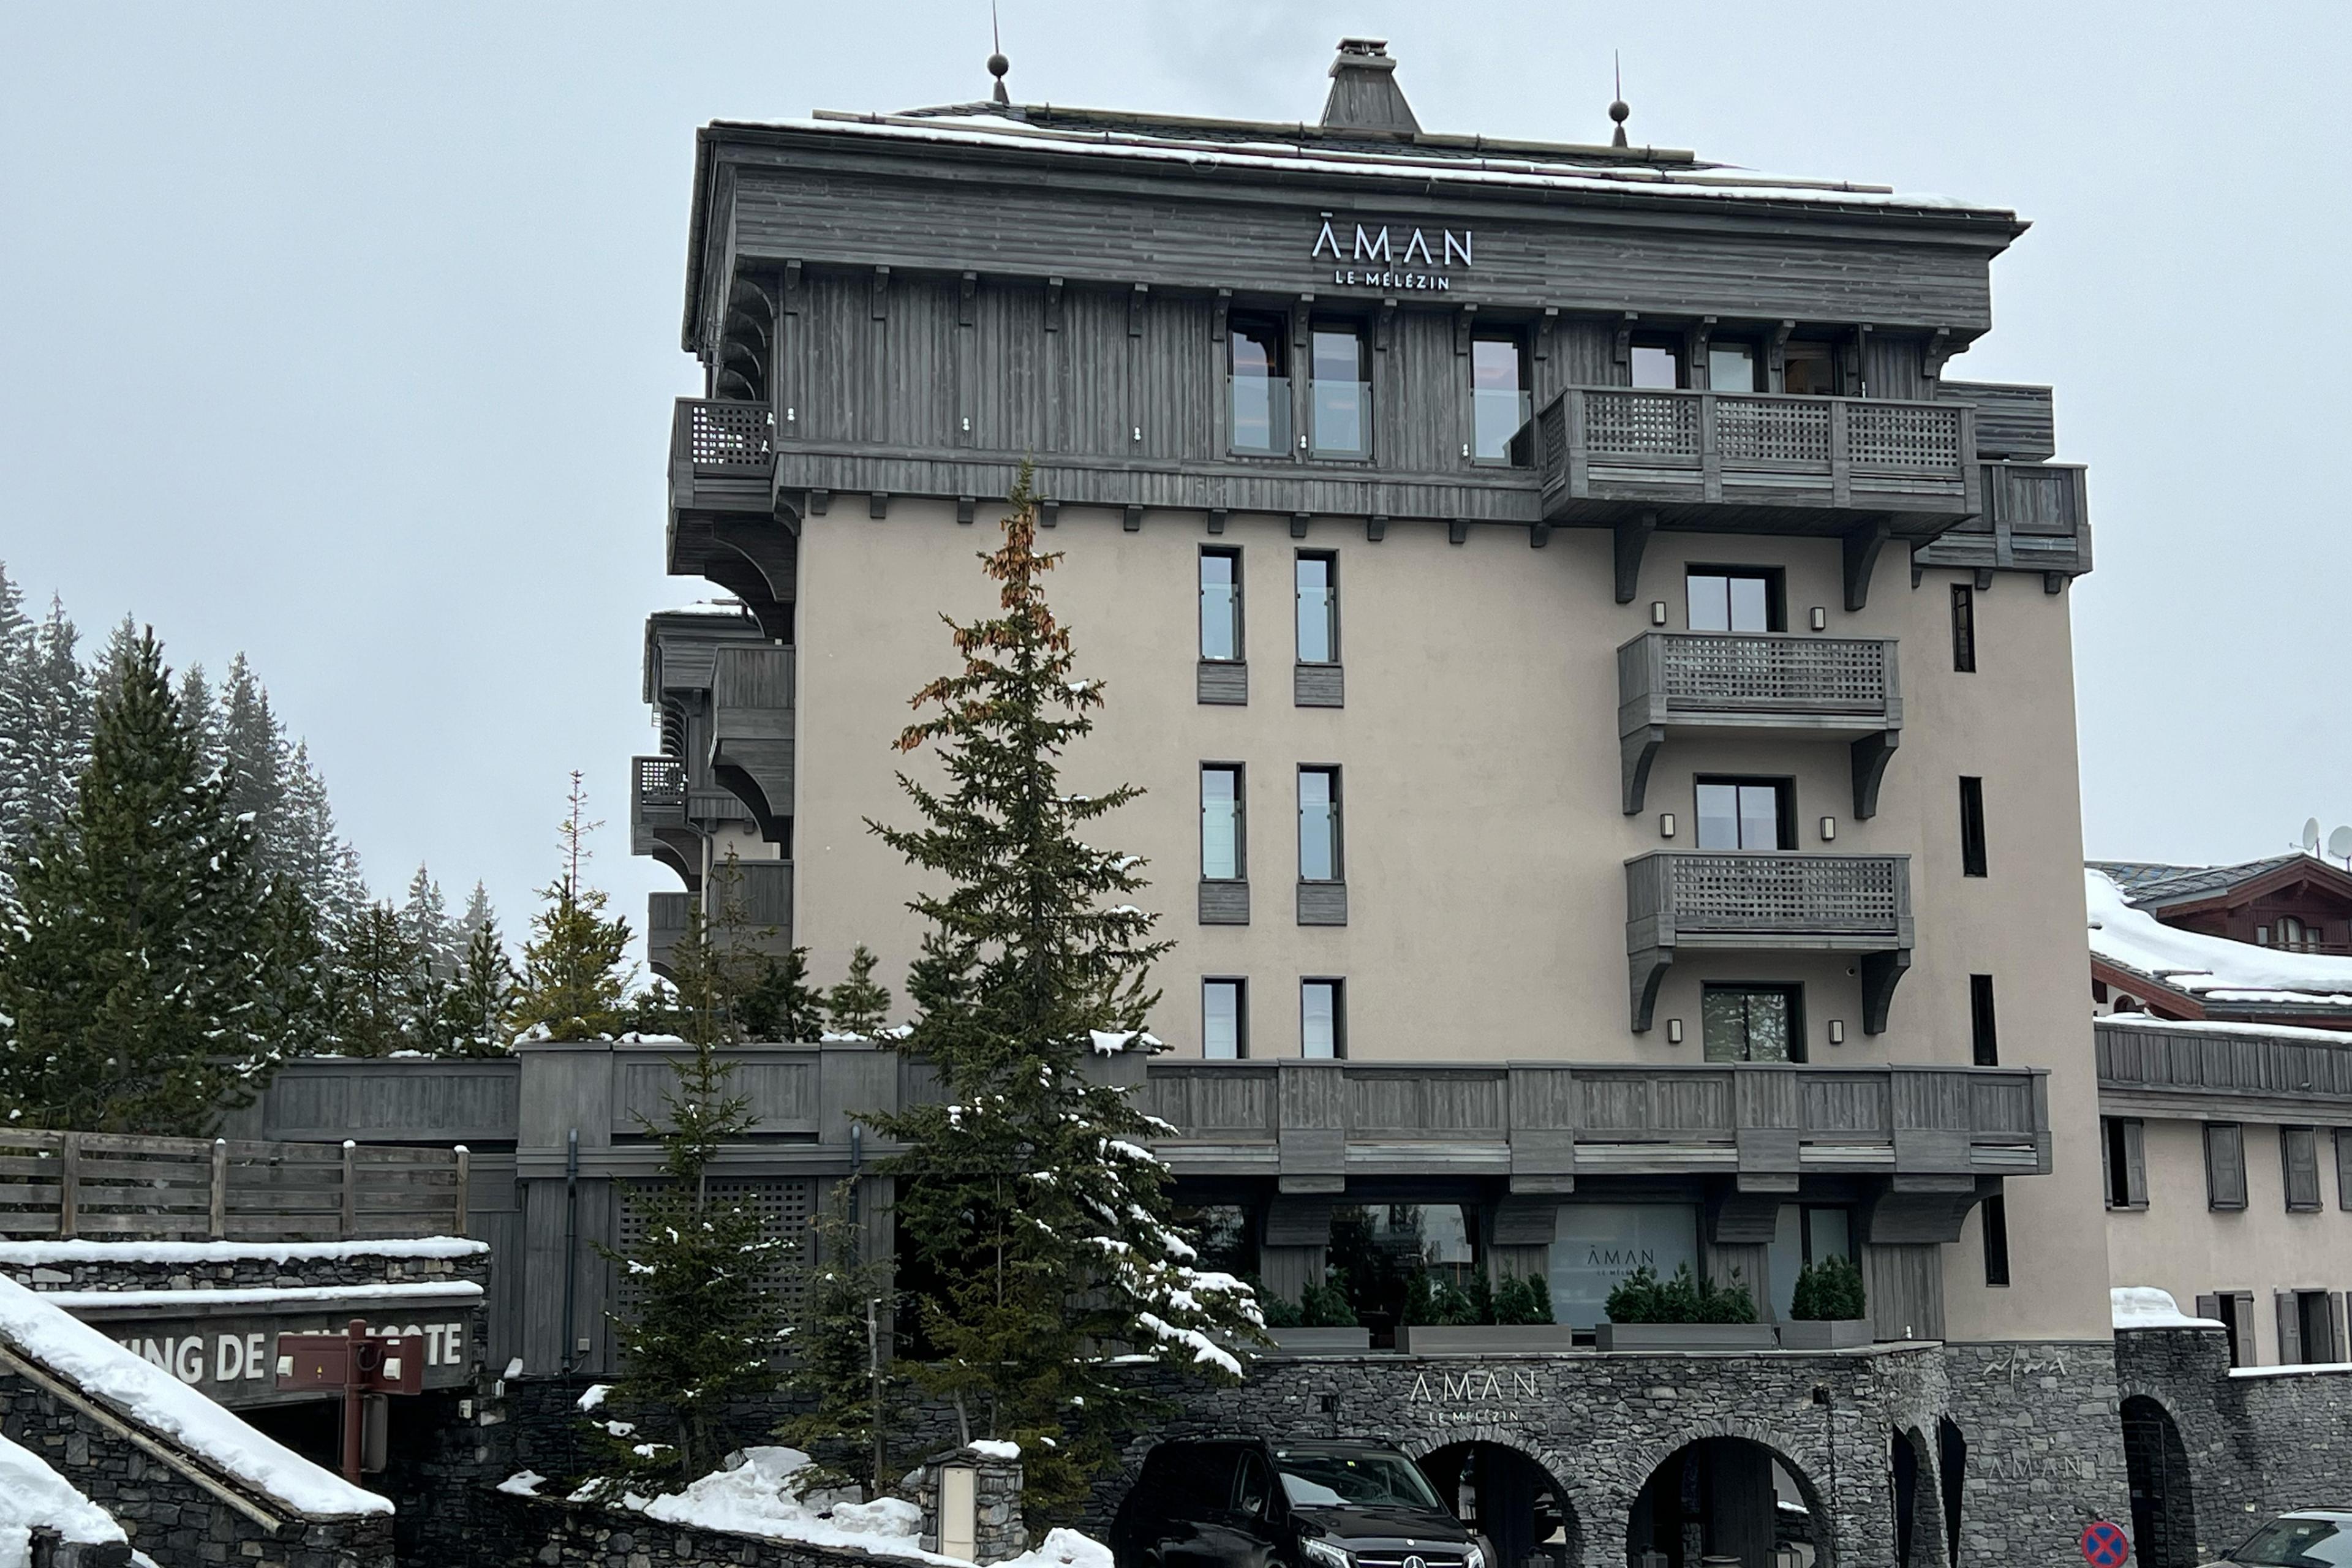 beige and gray hotel building near a forest